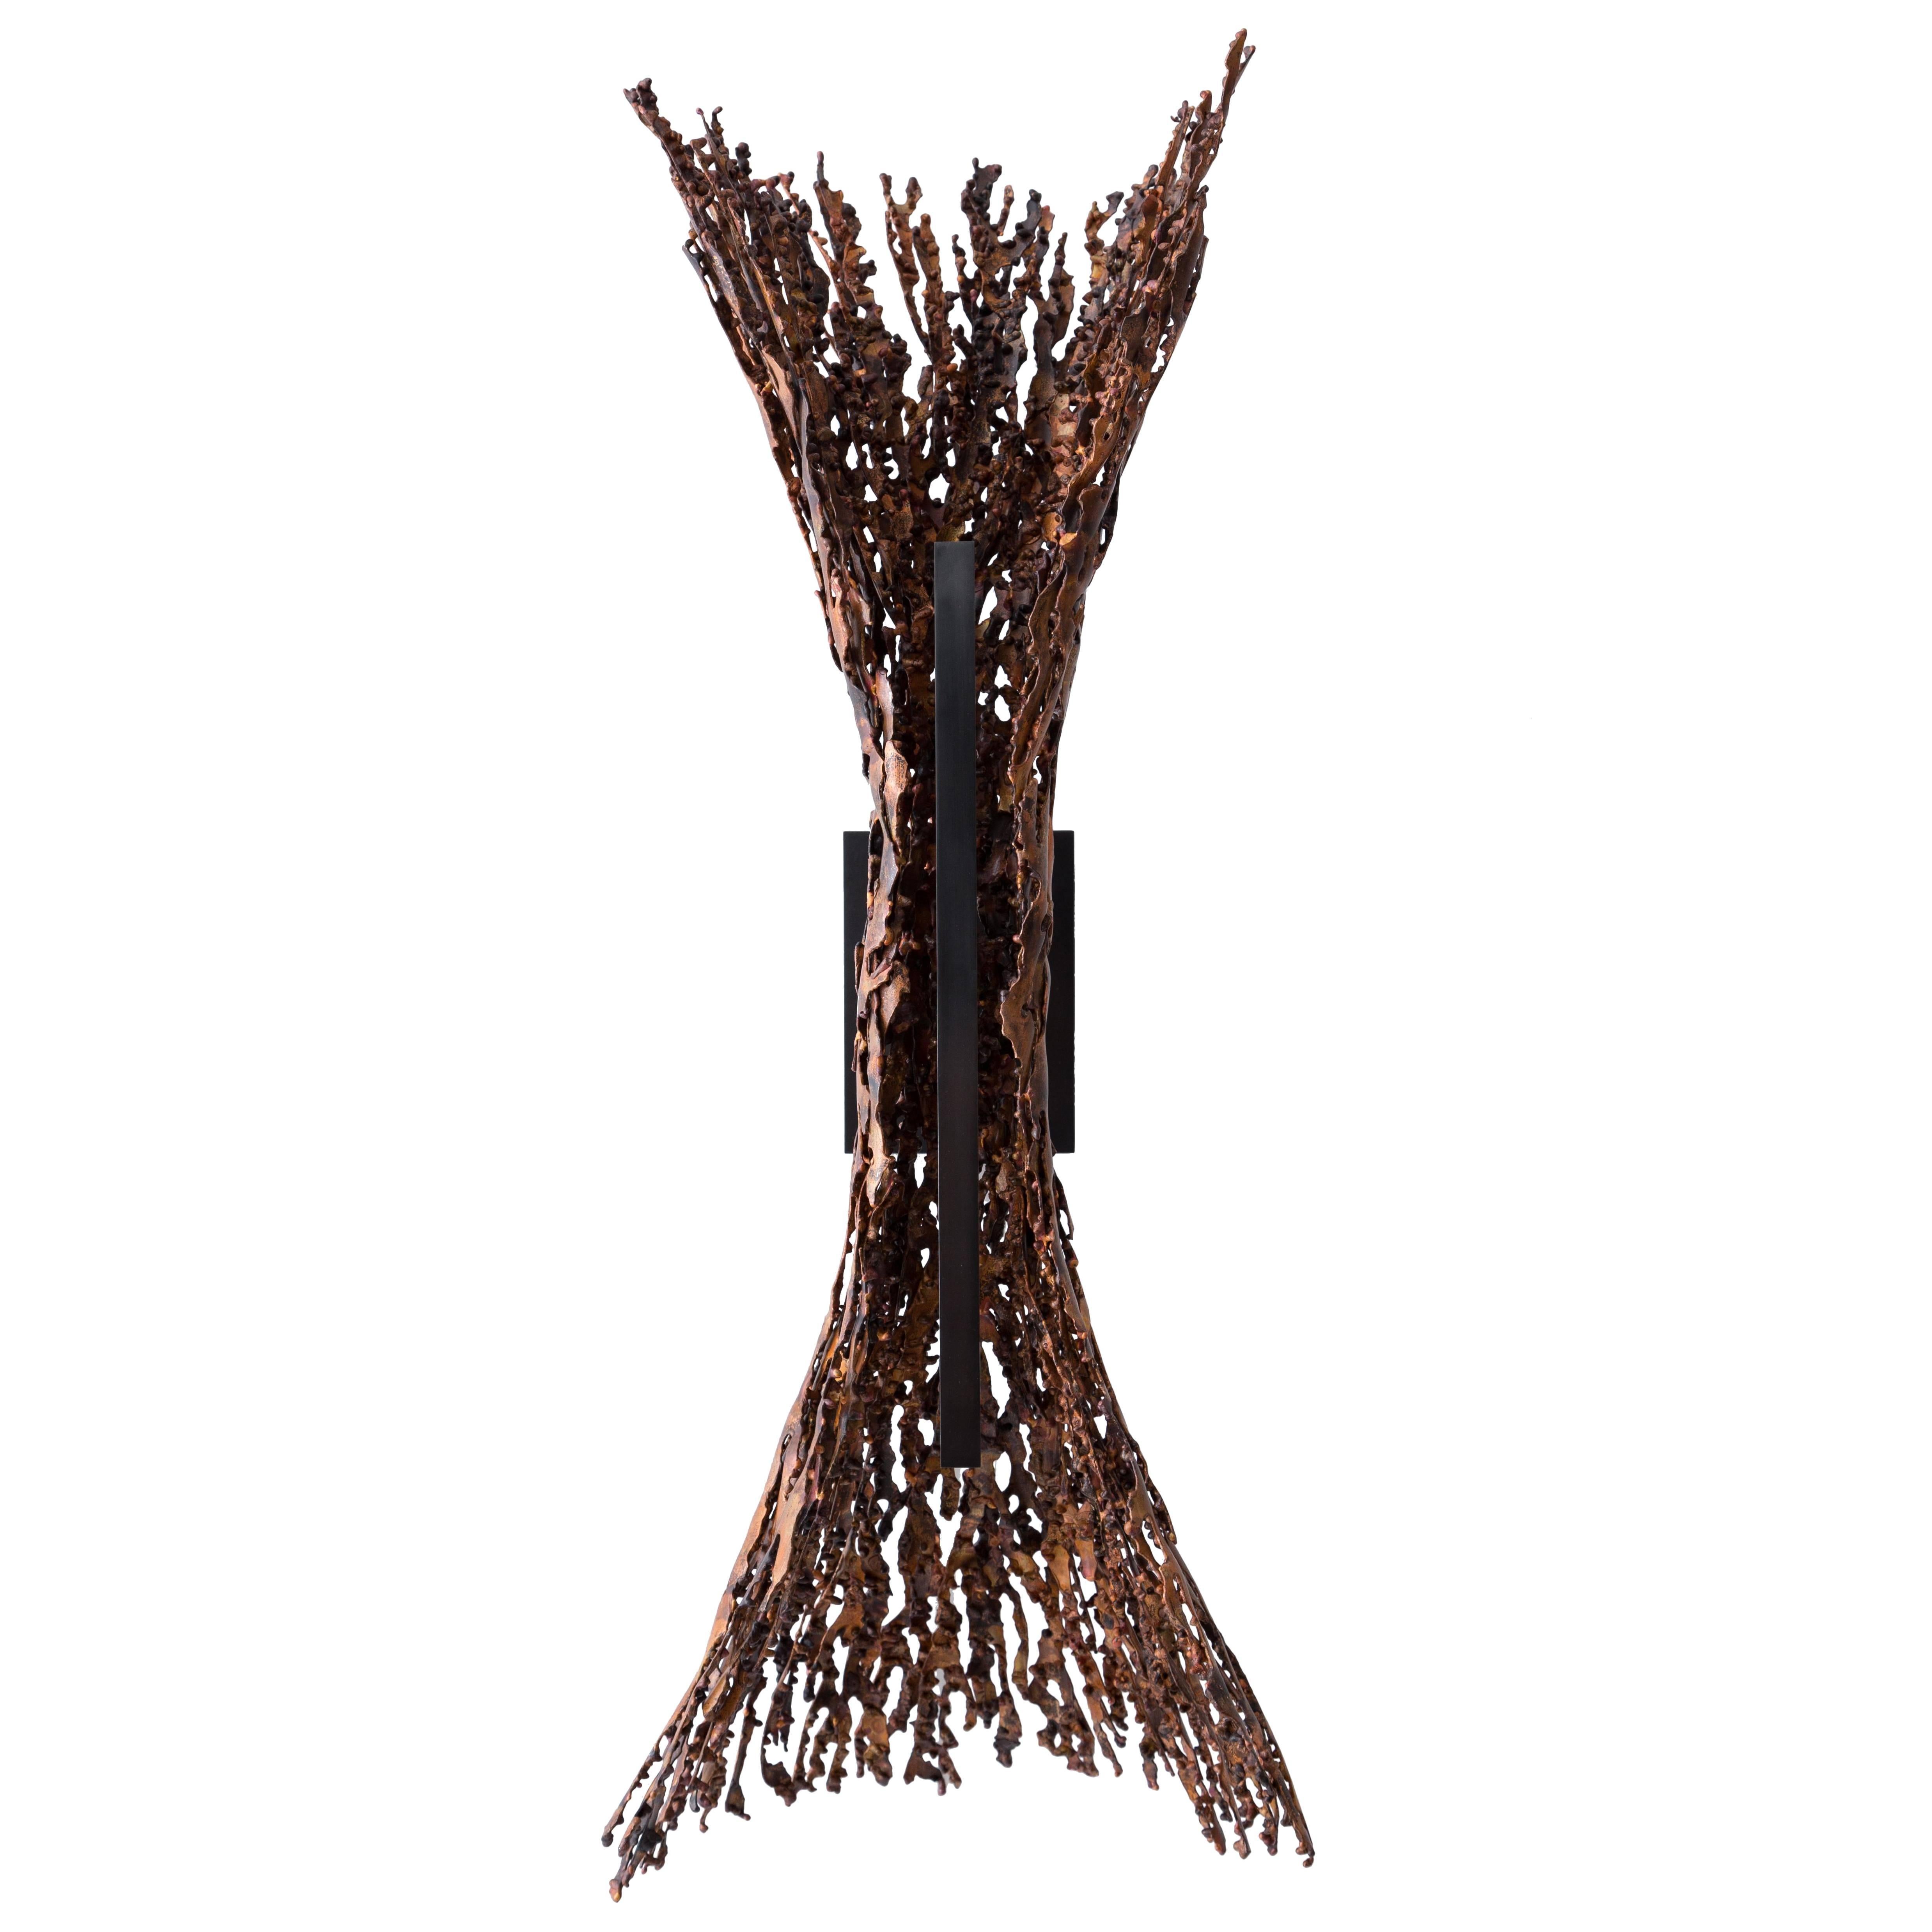 The burnt copper form sconce makes a bold statement. The body of the light is hand assembled from heat-formed copper pieces into a dramatic flaring shape that has the organic quality of something found in nature. The meandering edges and varying